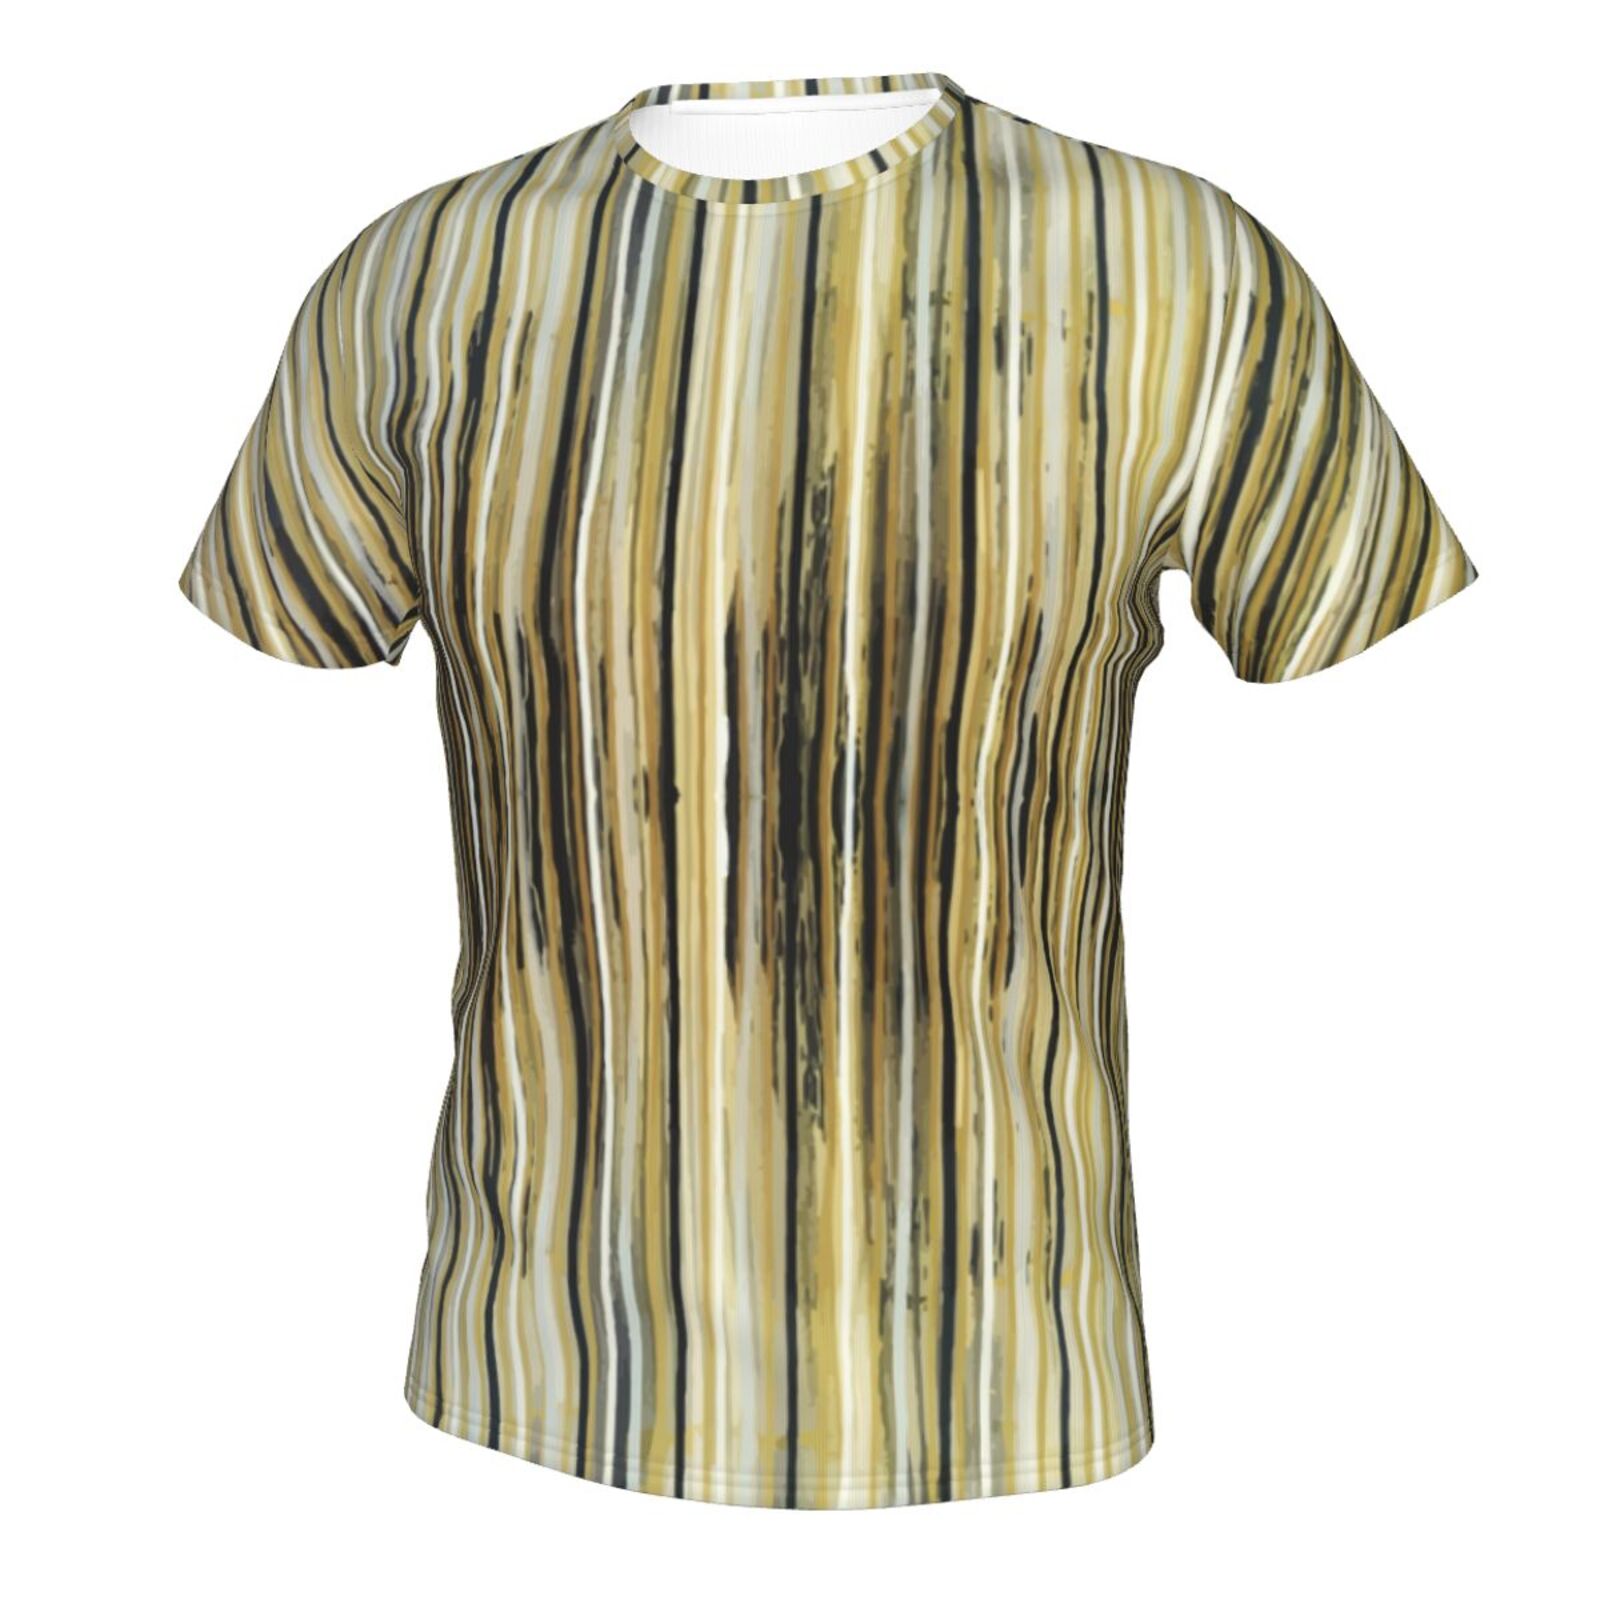 A Crush On Stripes Painting Elements Classic T-shirt